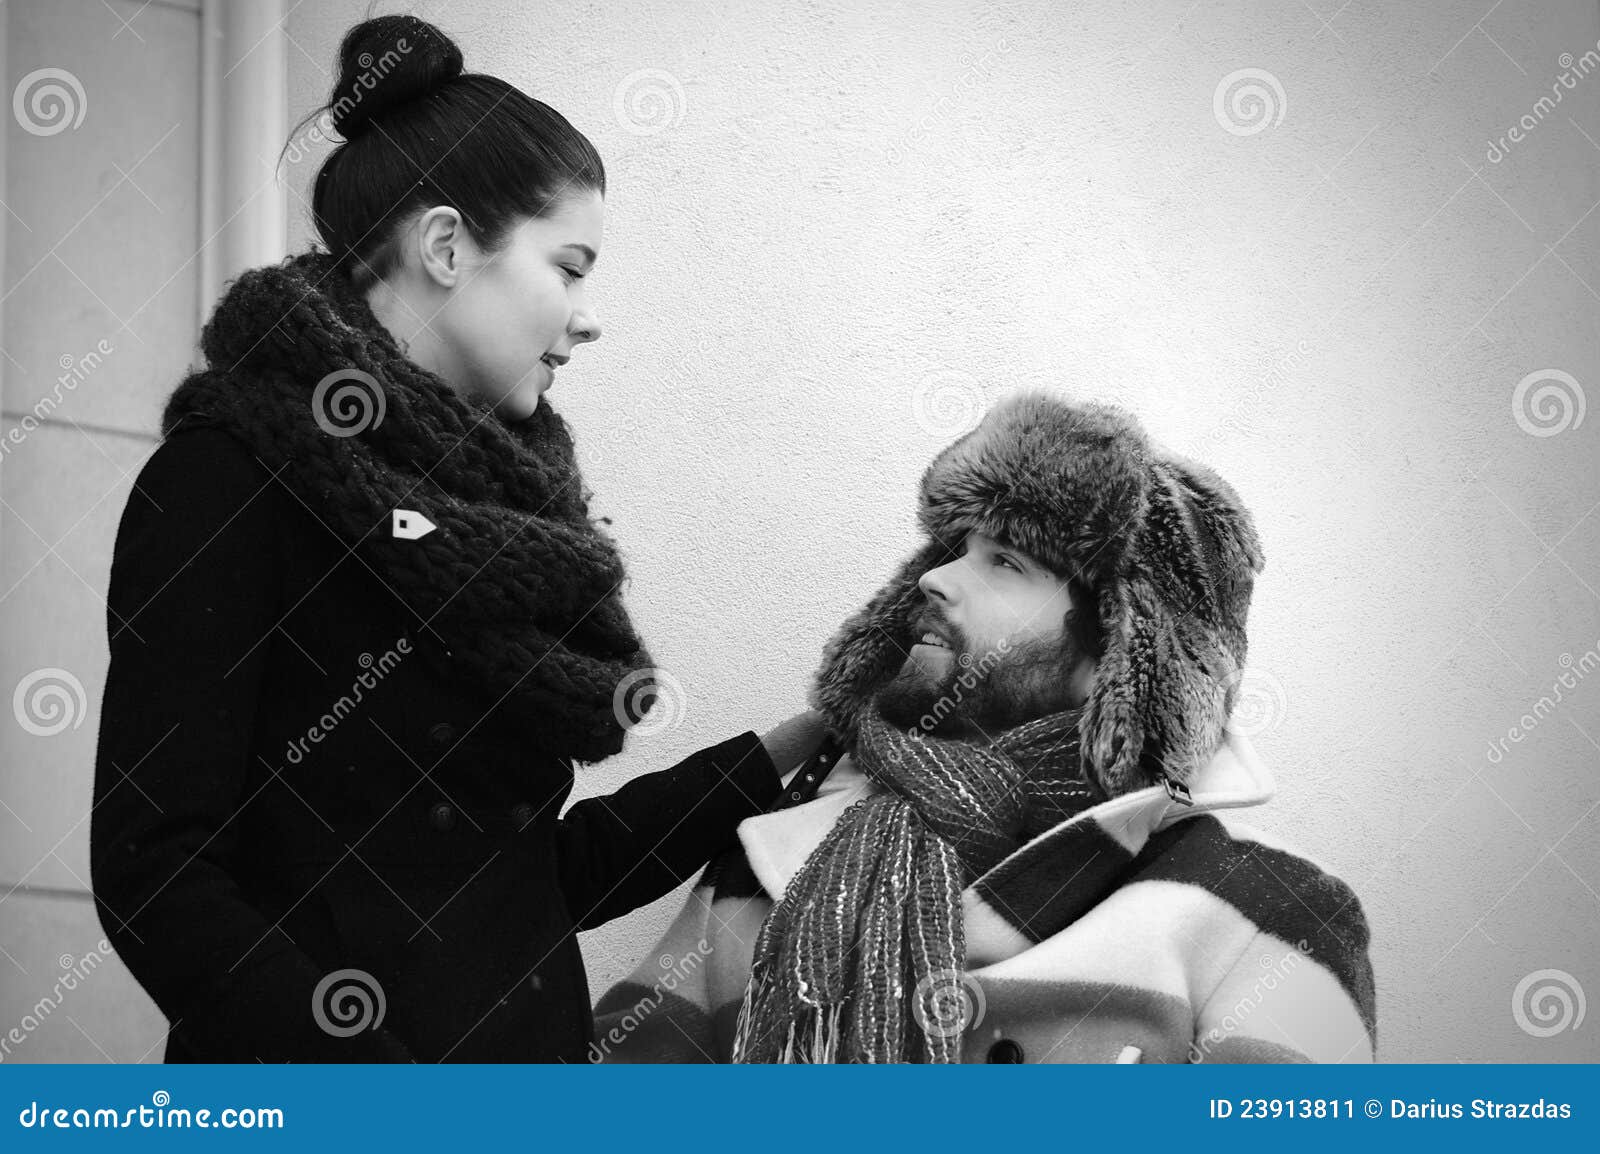 Woman and Man Talking in Retro Style Stock Image - Image of vintage ...